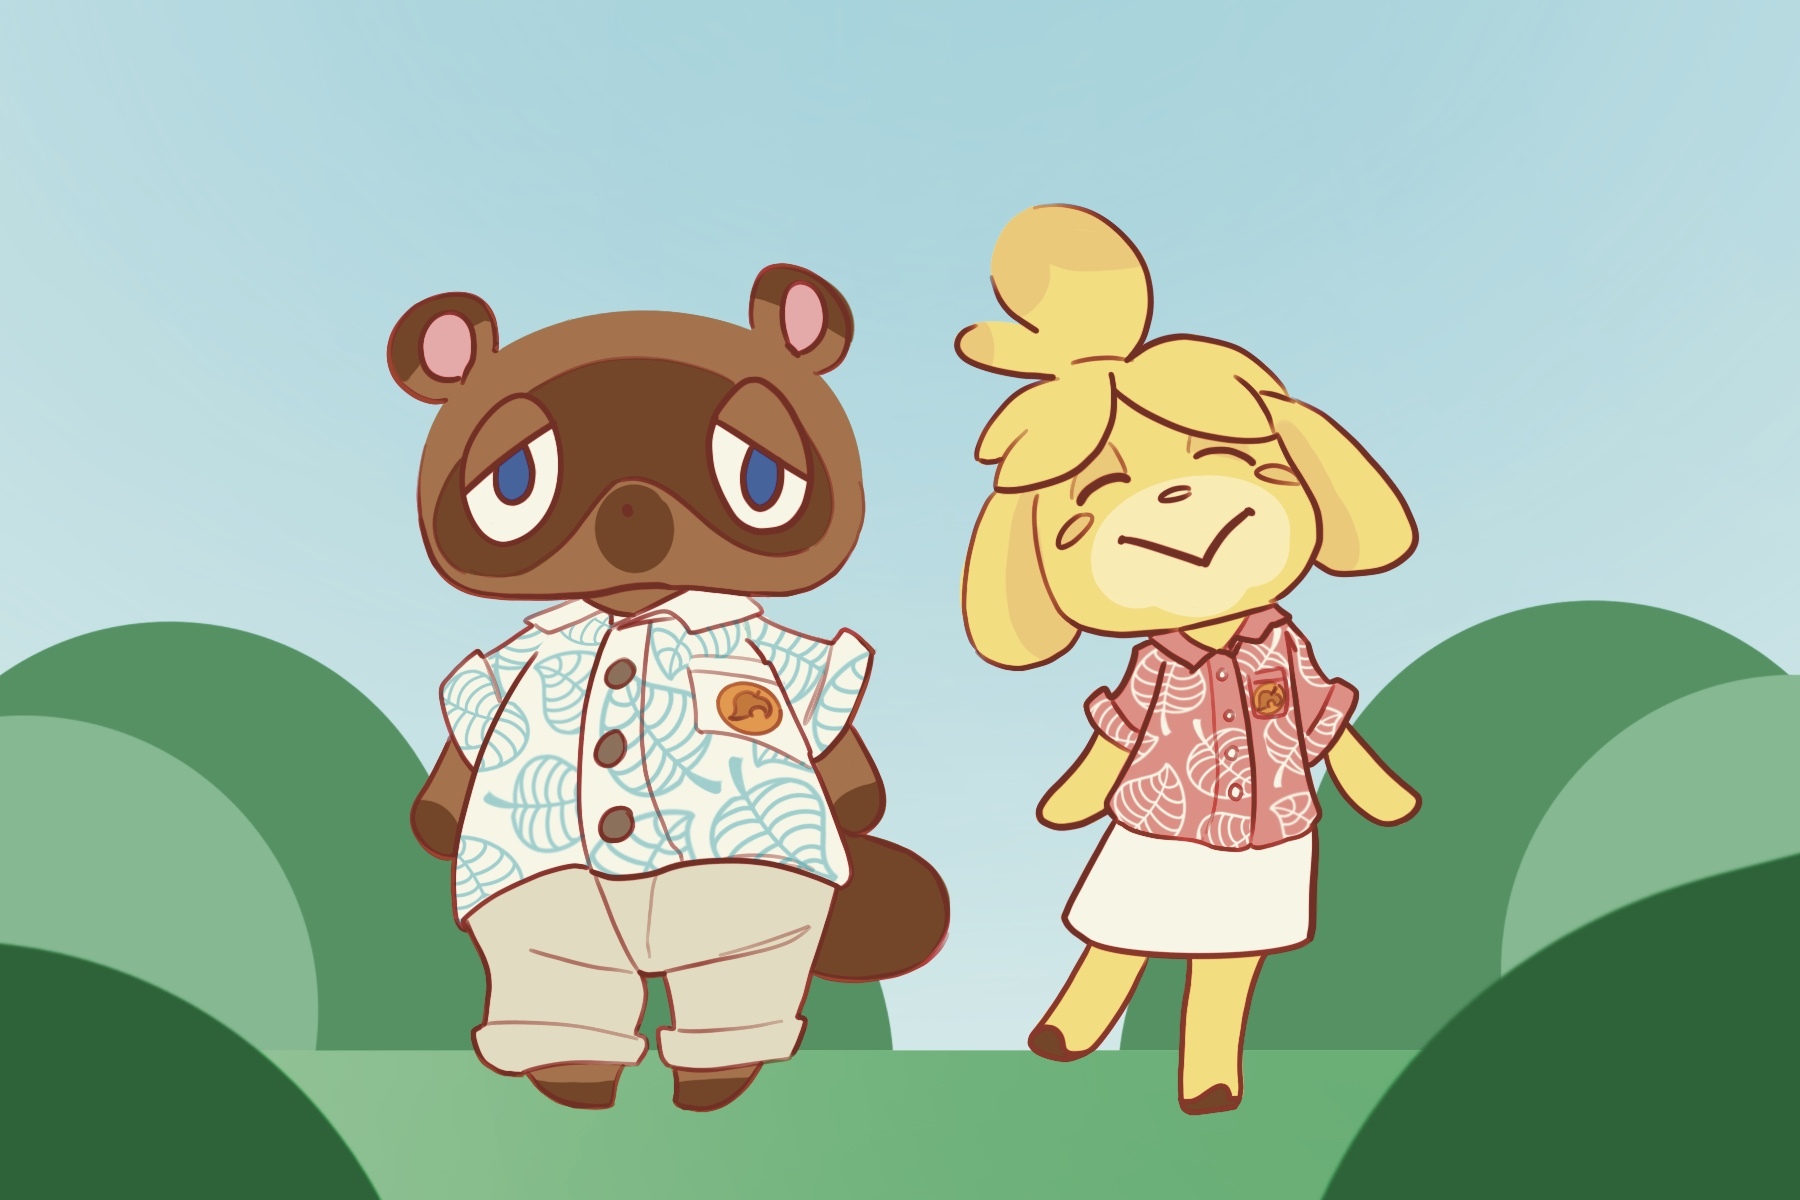 7 More Nintendo Switch Games for Animal Crossing Lovers